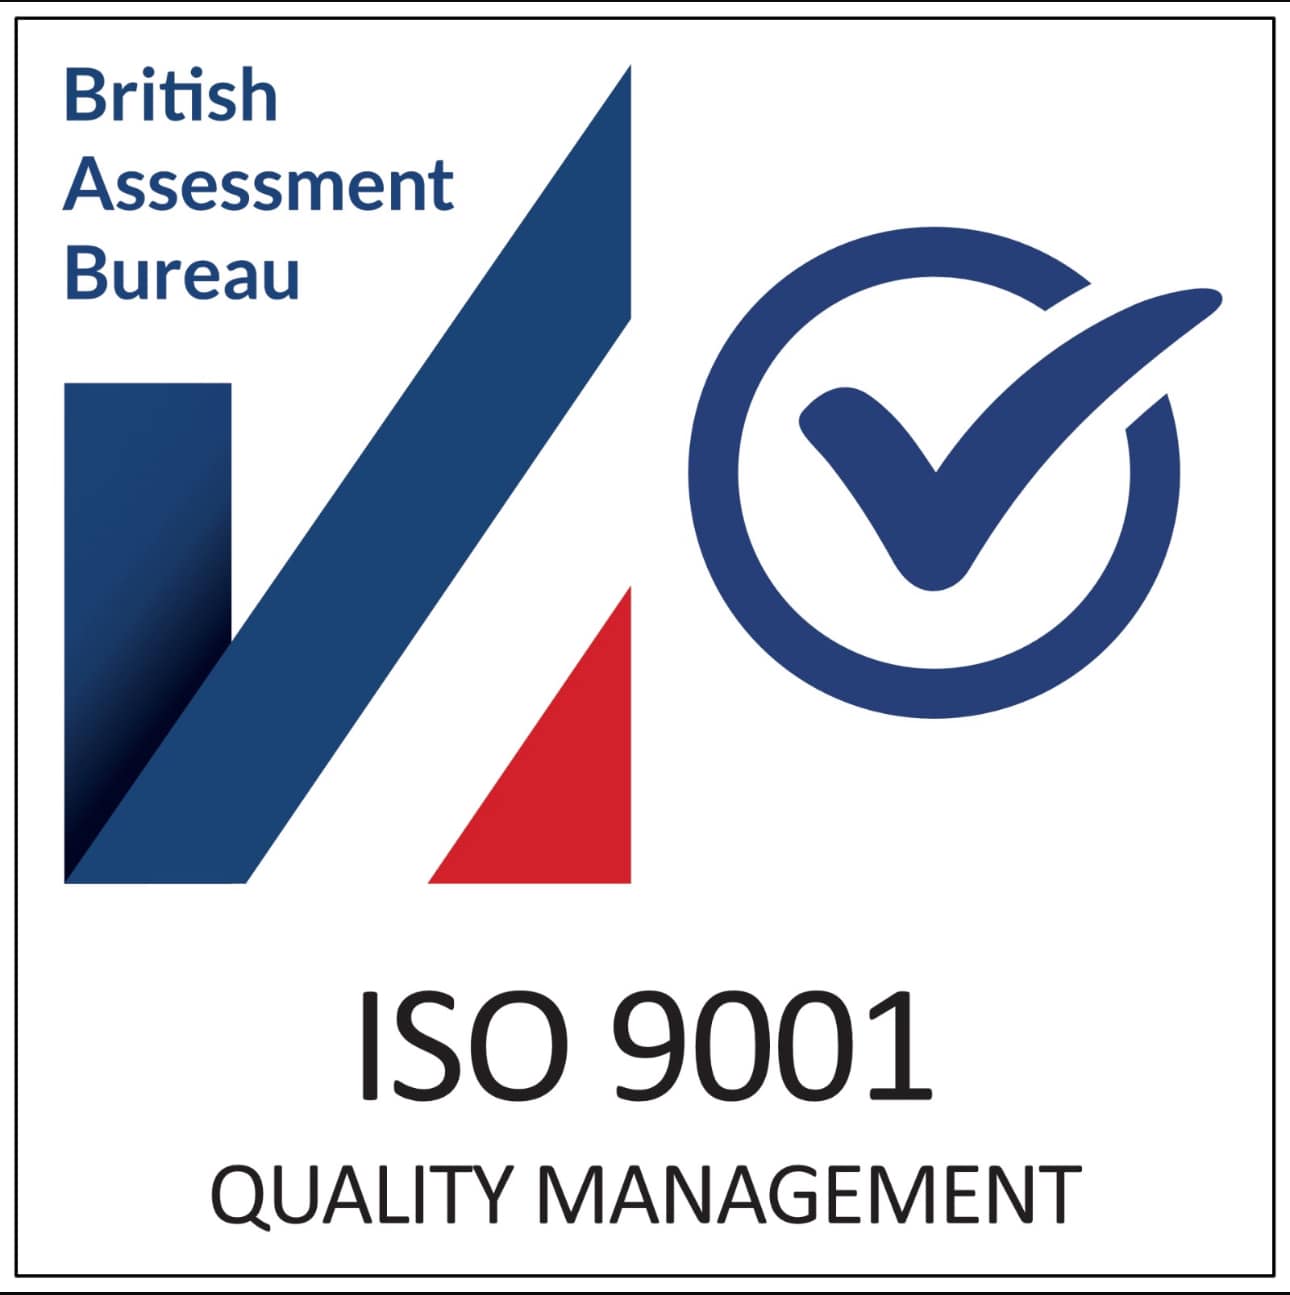 We are pleased to announce that Drain Technology UK Ltd are now ISO 9001, 14001 and 45001 approved and certified!